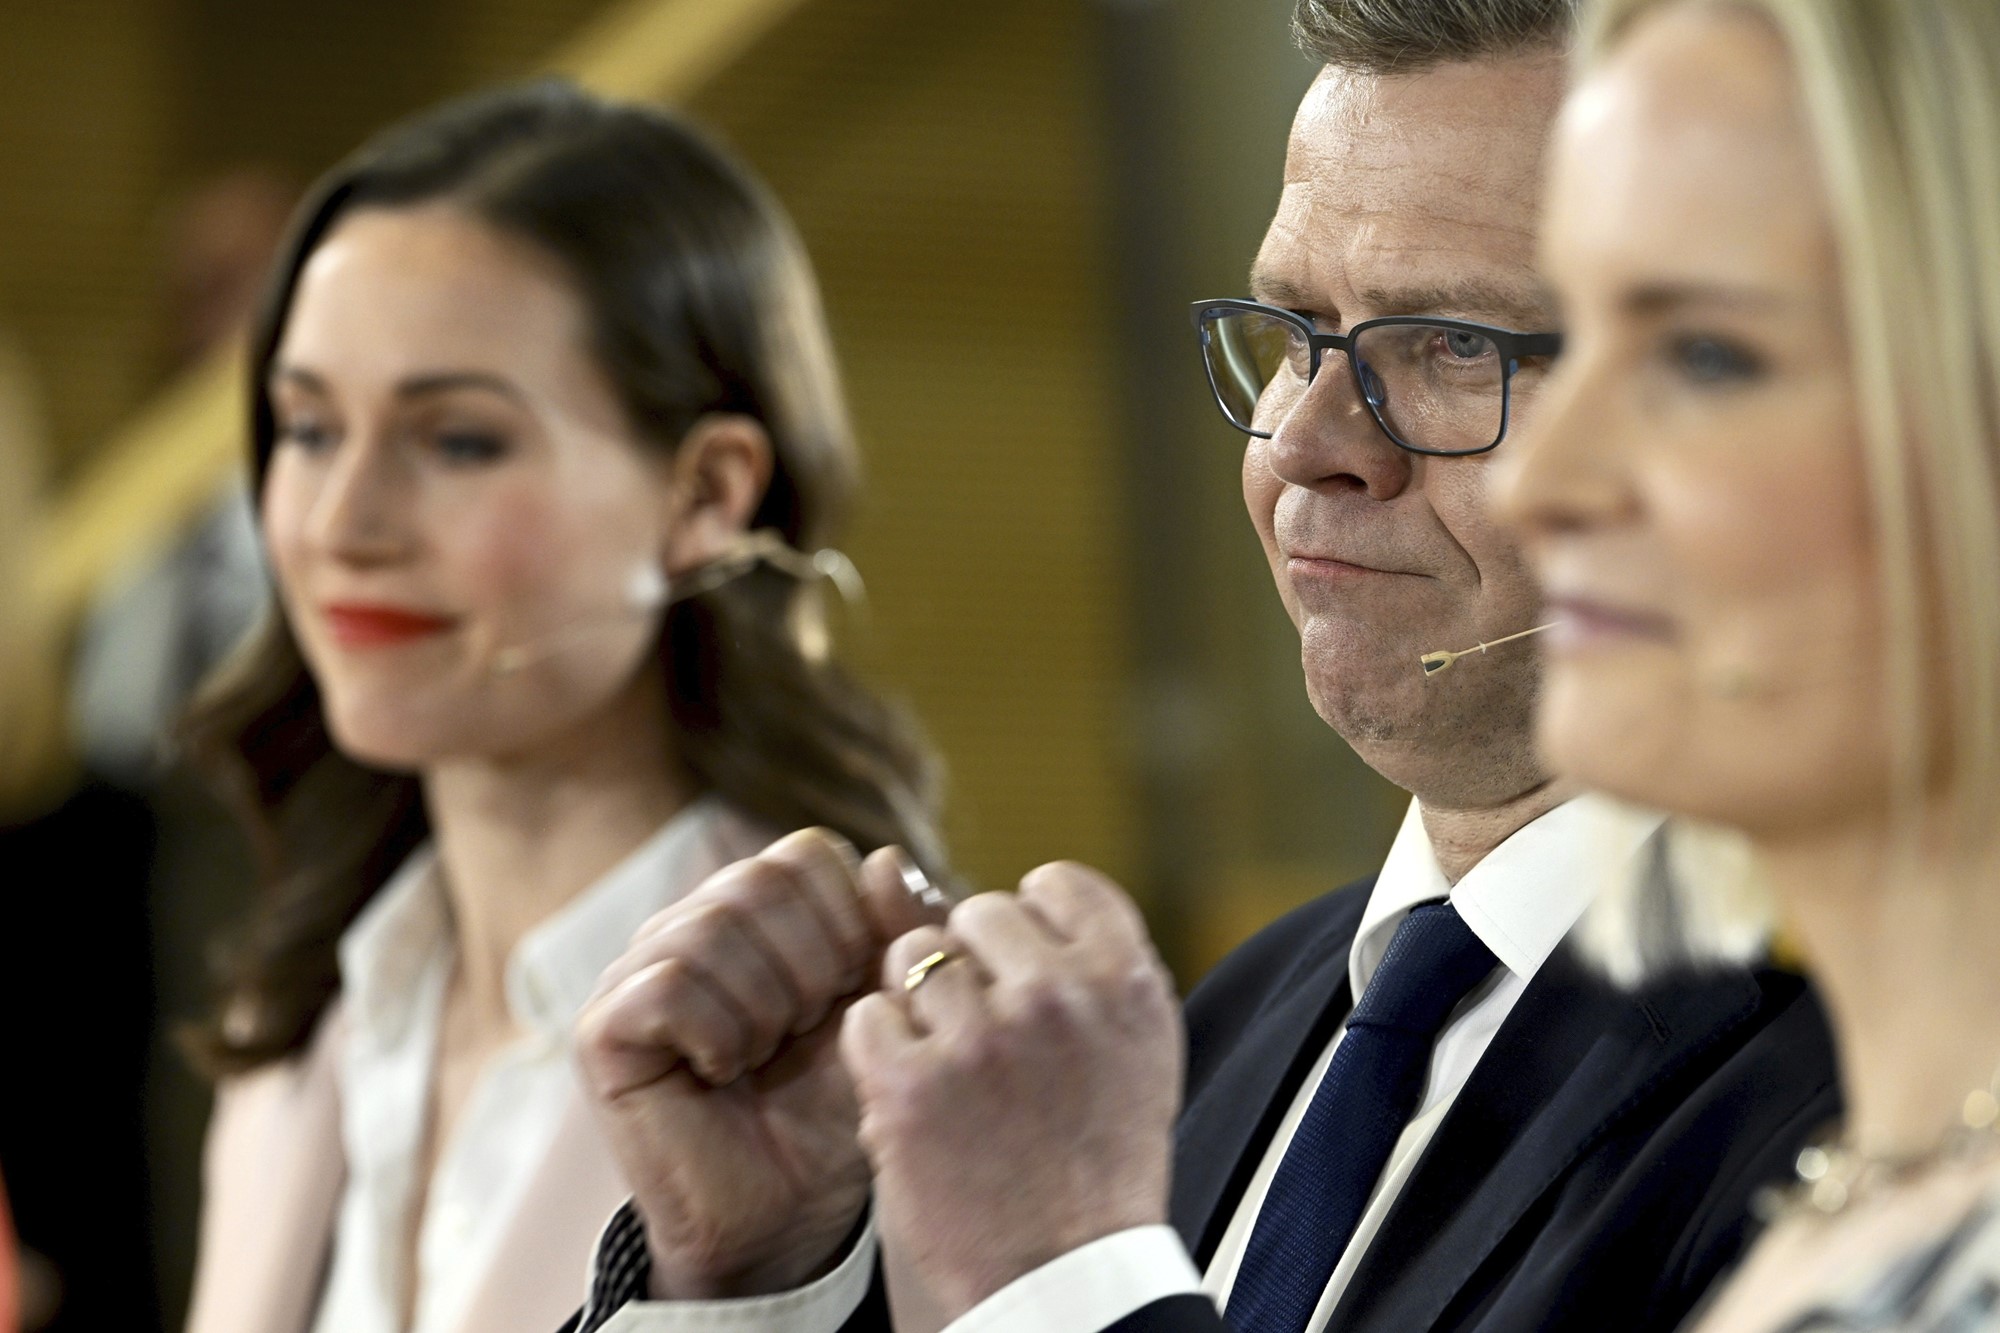 A white man with glasses and a suit clenches his fists. Two women are standing either side of him